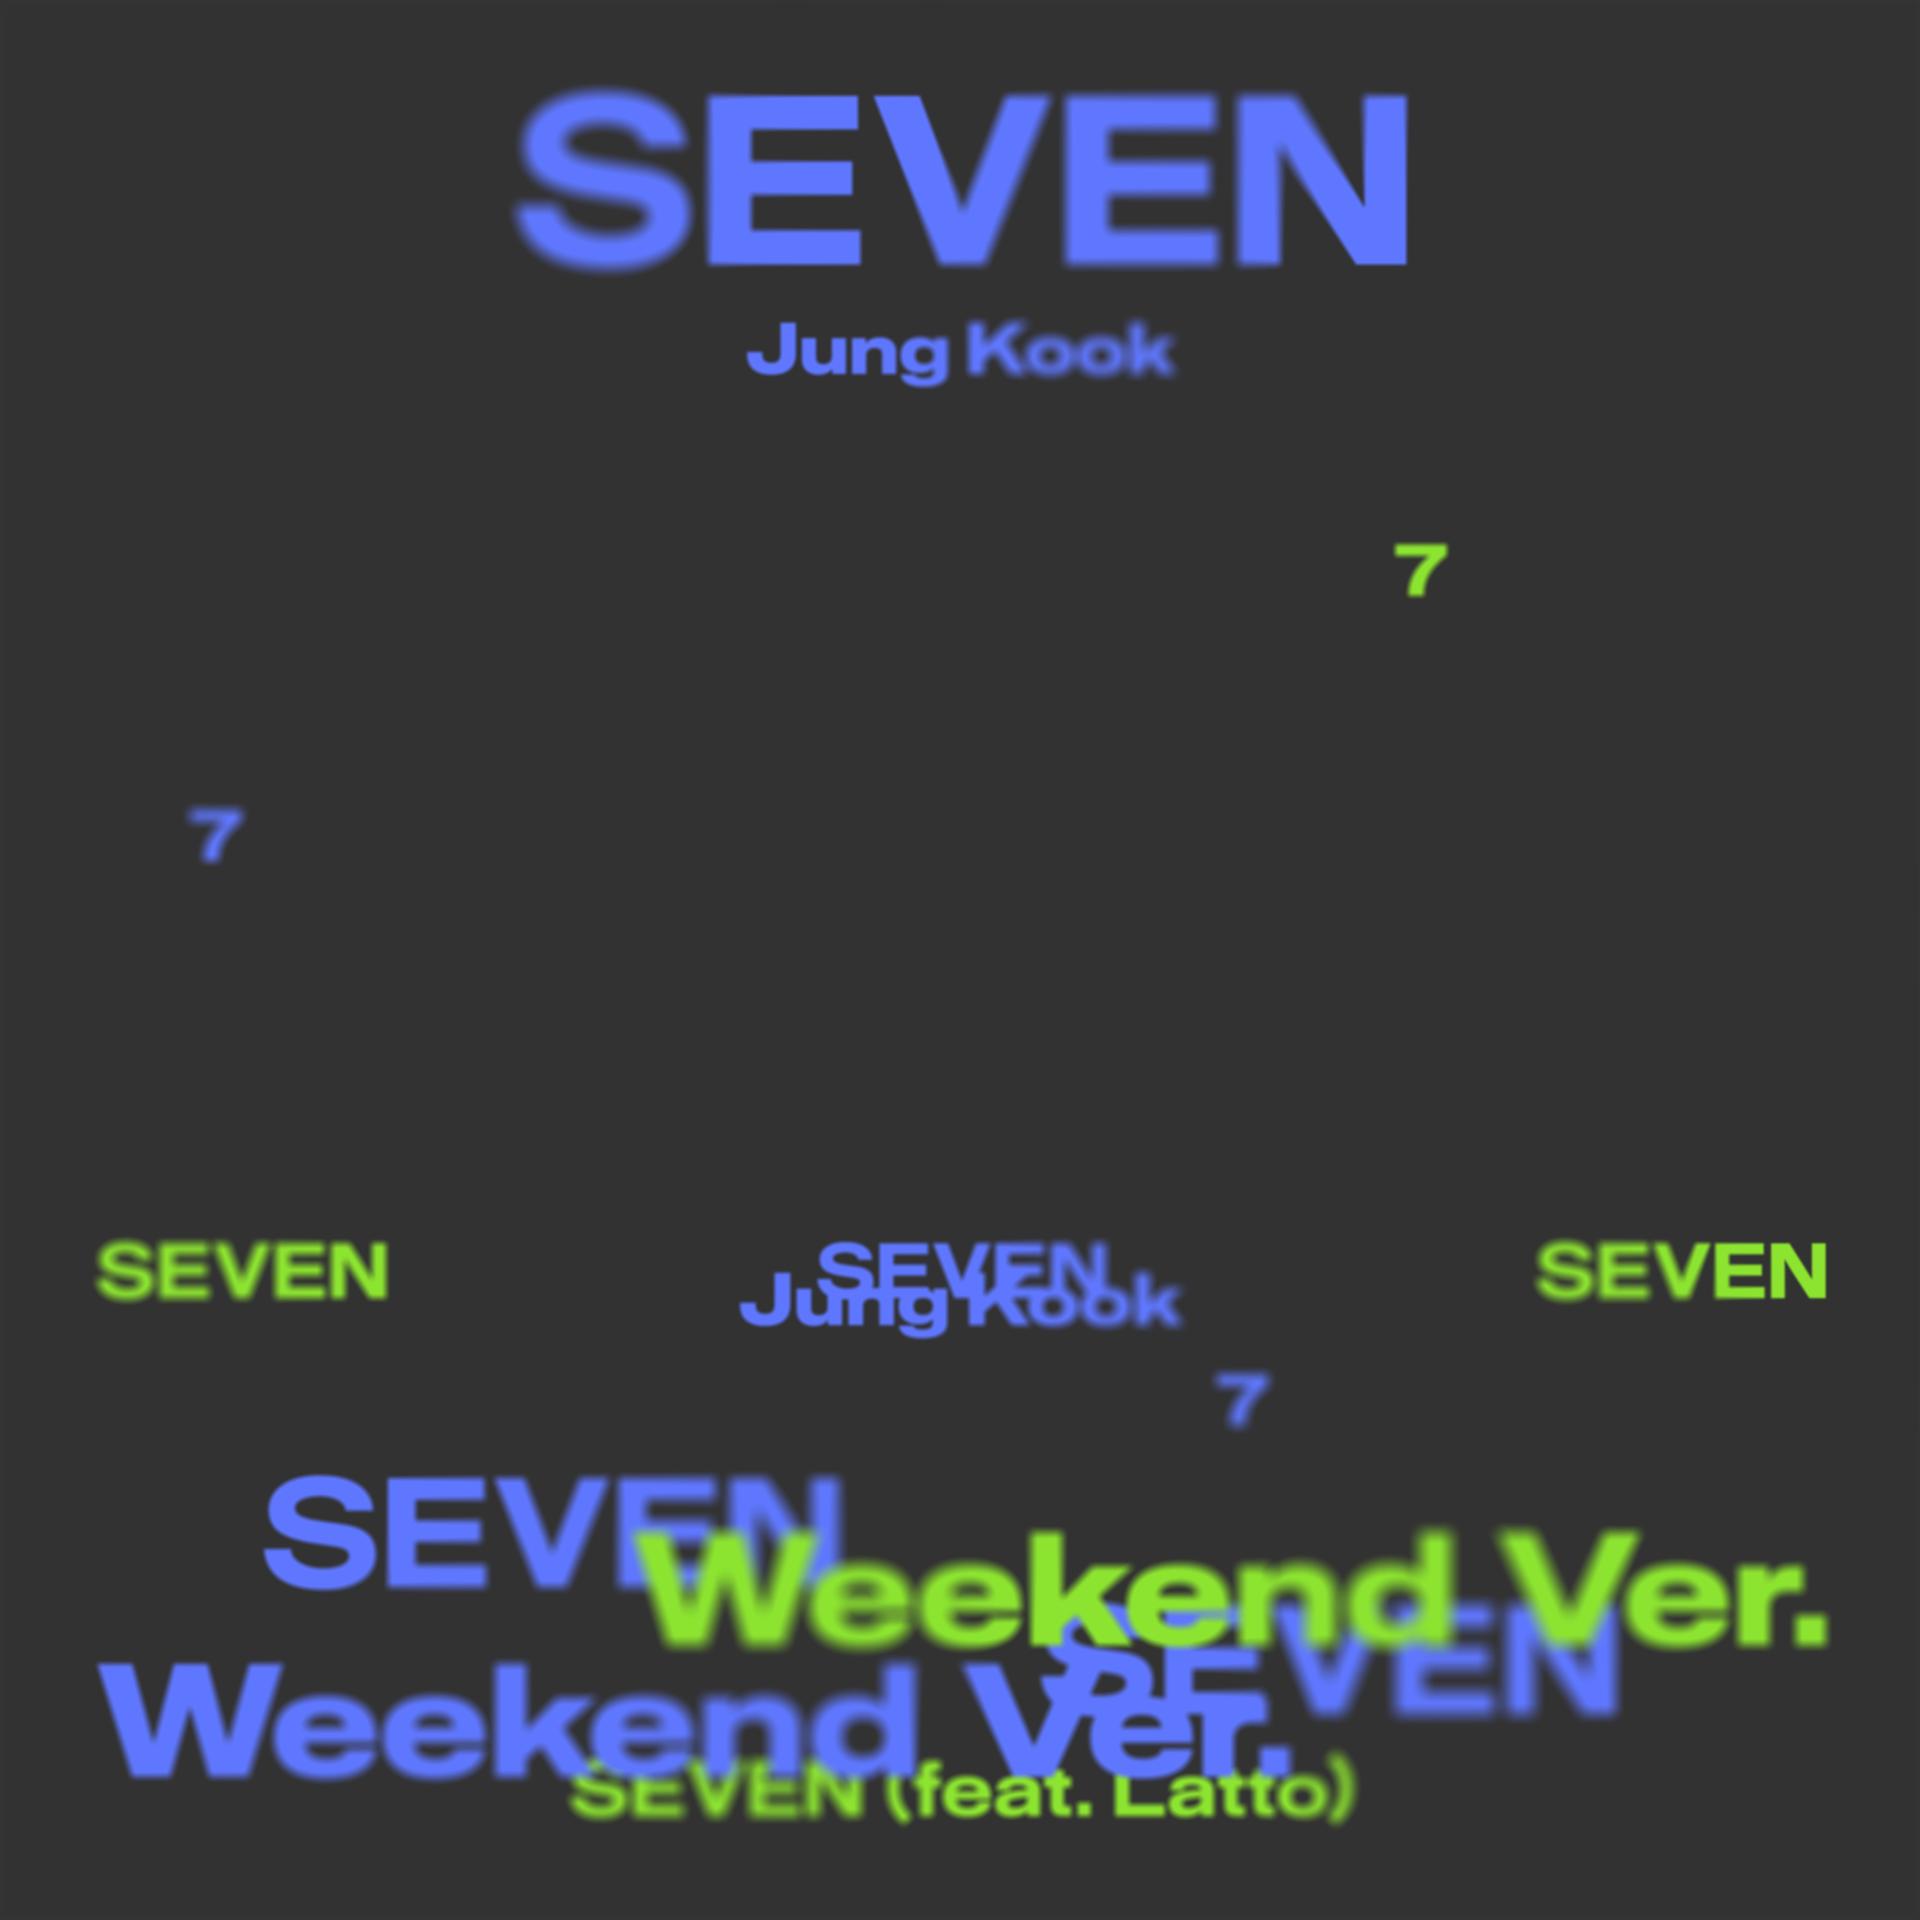 About Music on X: Jungkook of BTS in 'Seven': Monday, Tuesday, Wednesday  Thursday, Friday, Saturday, Sunday Monday, Tuesday, Wednesday Thursday,  Friday, seven days a week Every hour every minute every second, you